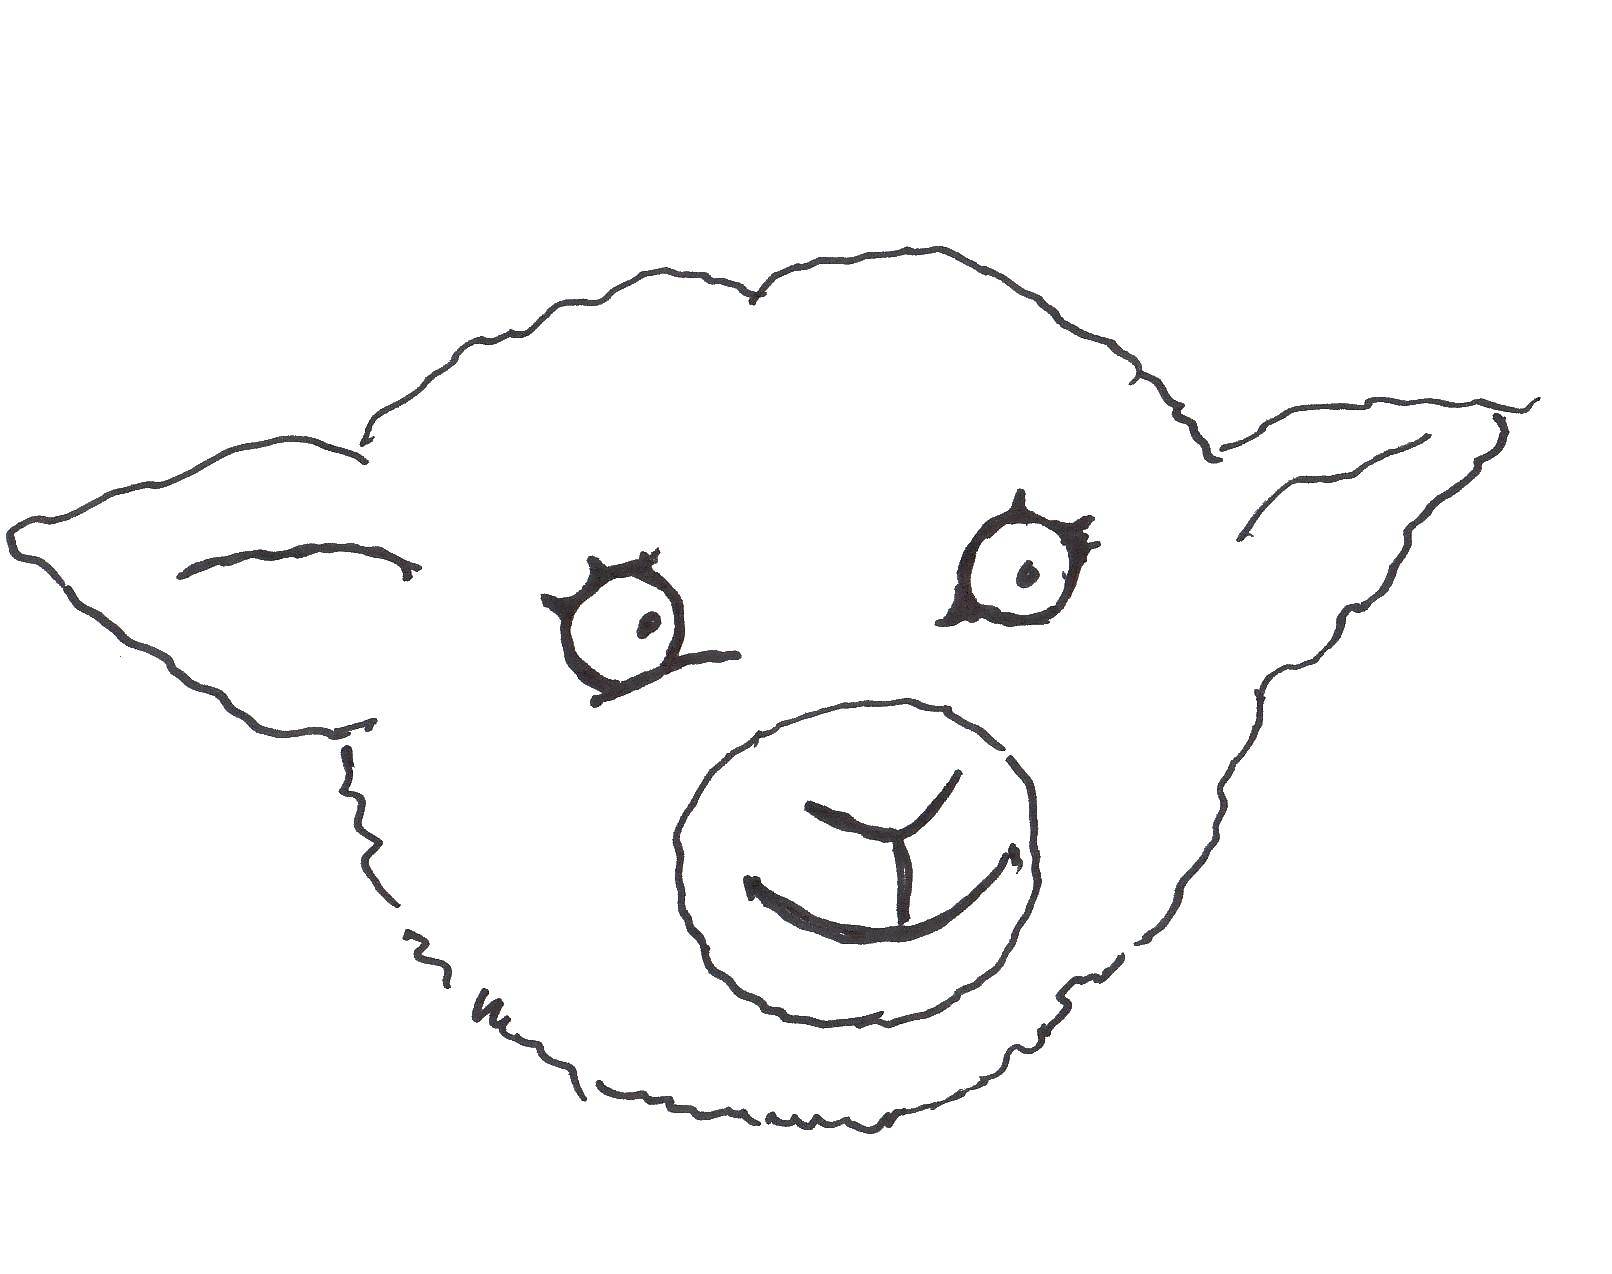 Coloring Sheep. Category The contour of sheep to cut. Tags:  contour , sheep, animals.